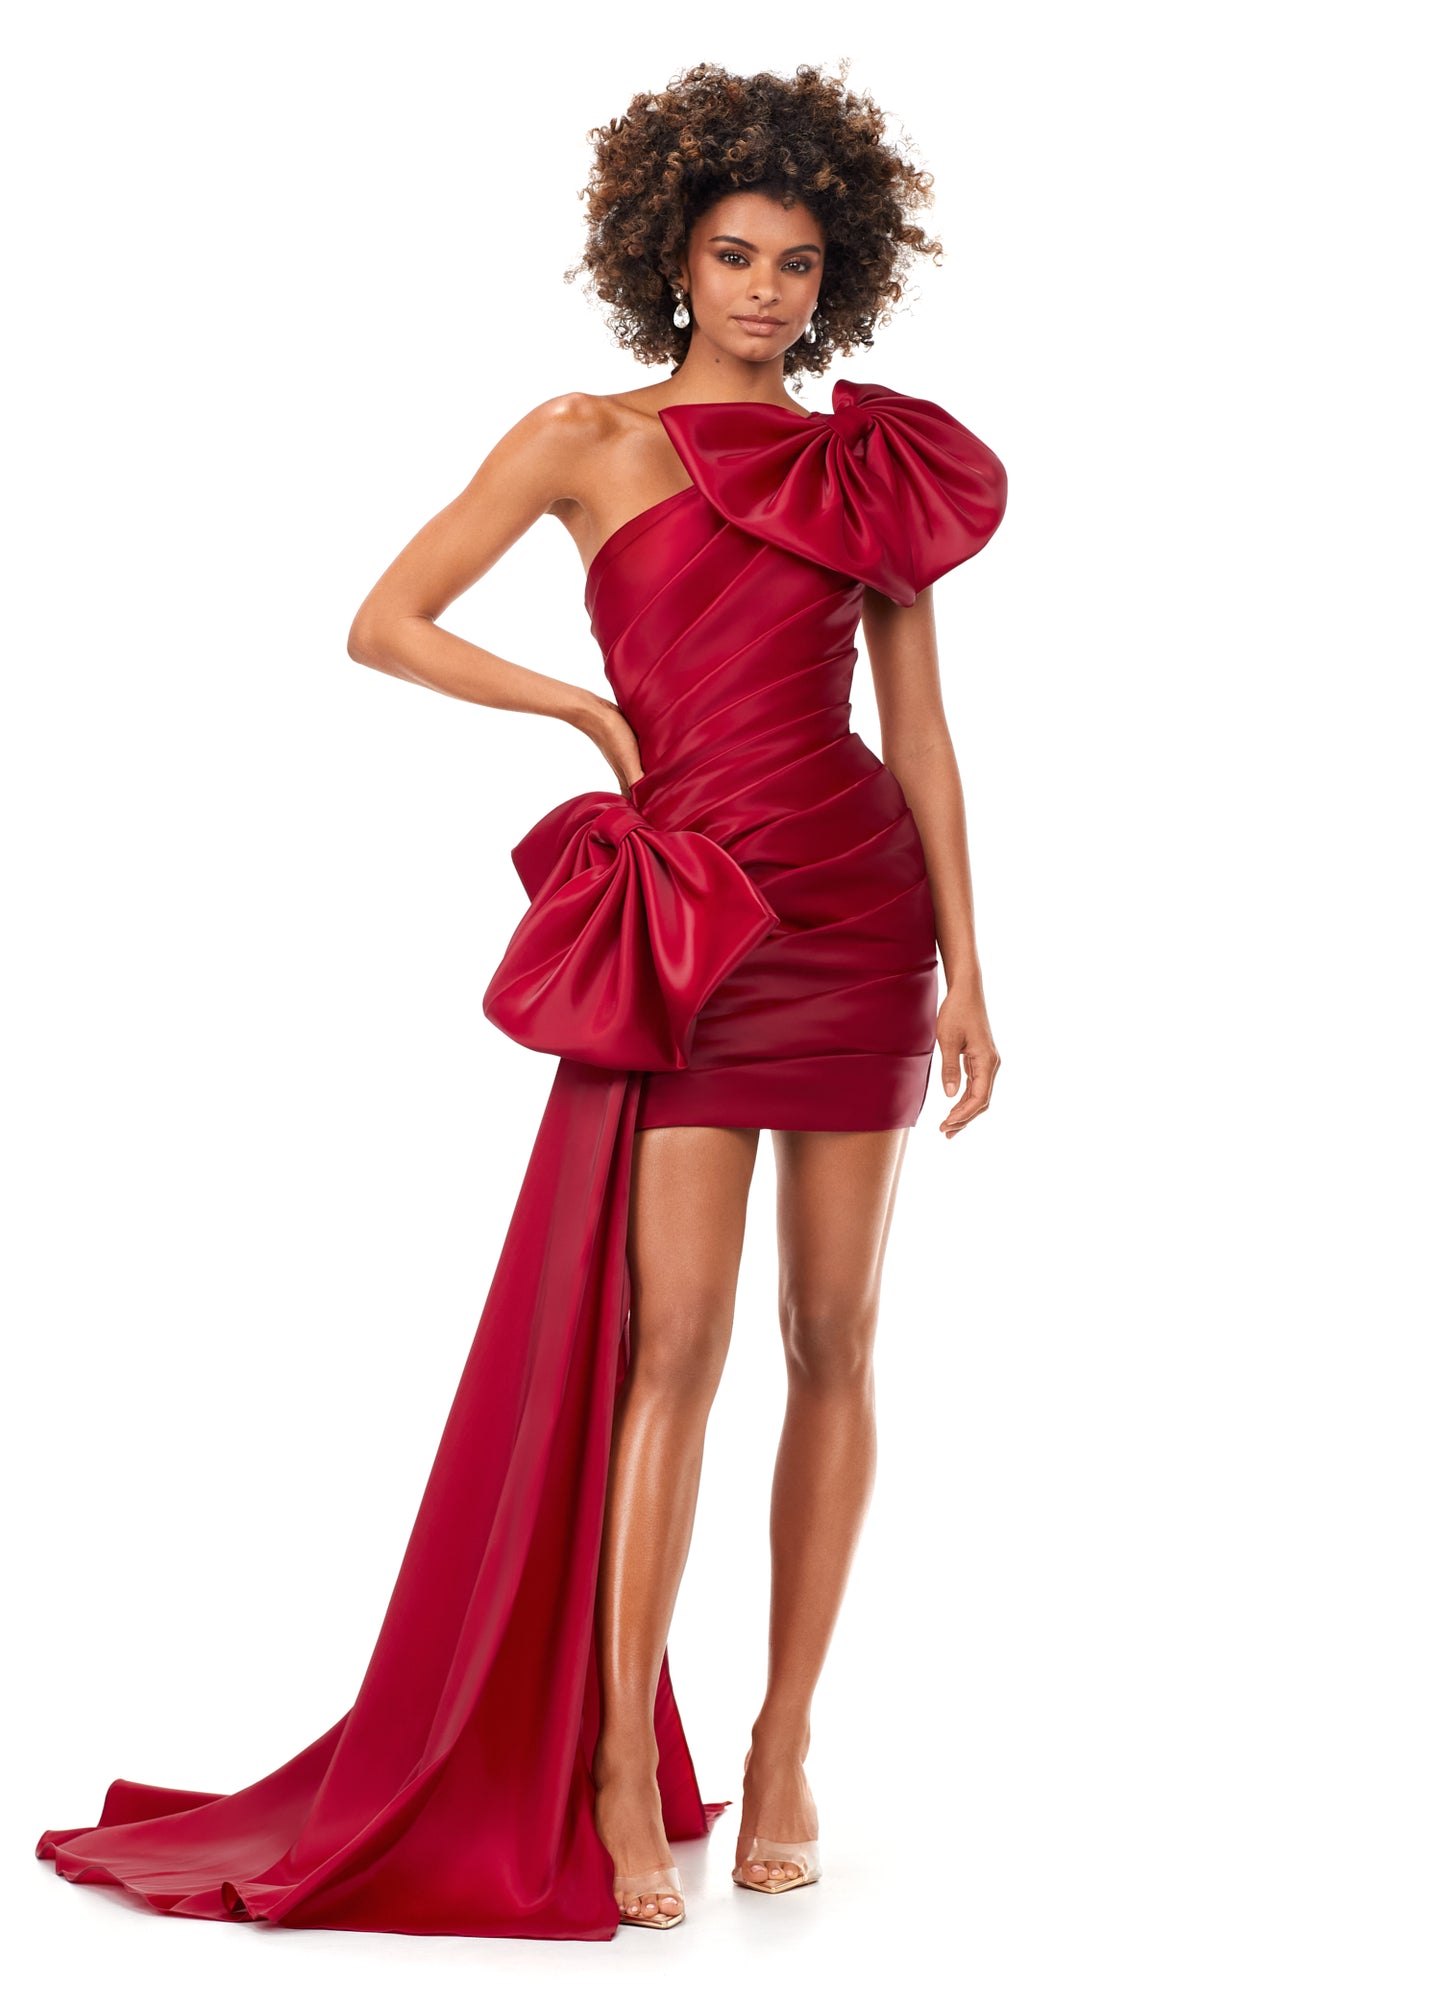 Red Ashley Lauren 11327 This ultra chic one shoulder cocktail dress is complete with bows. The ruched bodice and fitted skirt provide the perfect silhouette. The hip is accented with an oversized bow and side skirt.